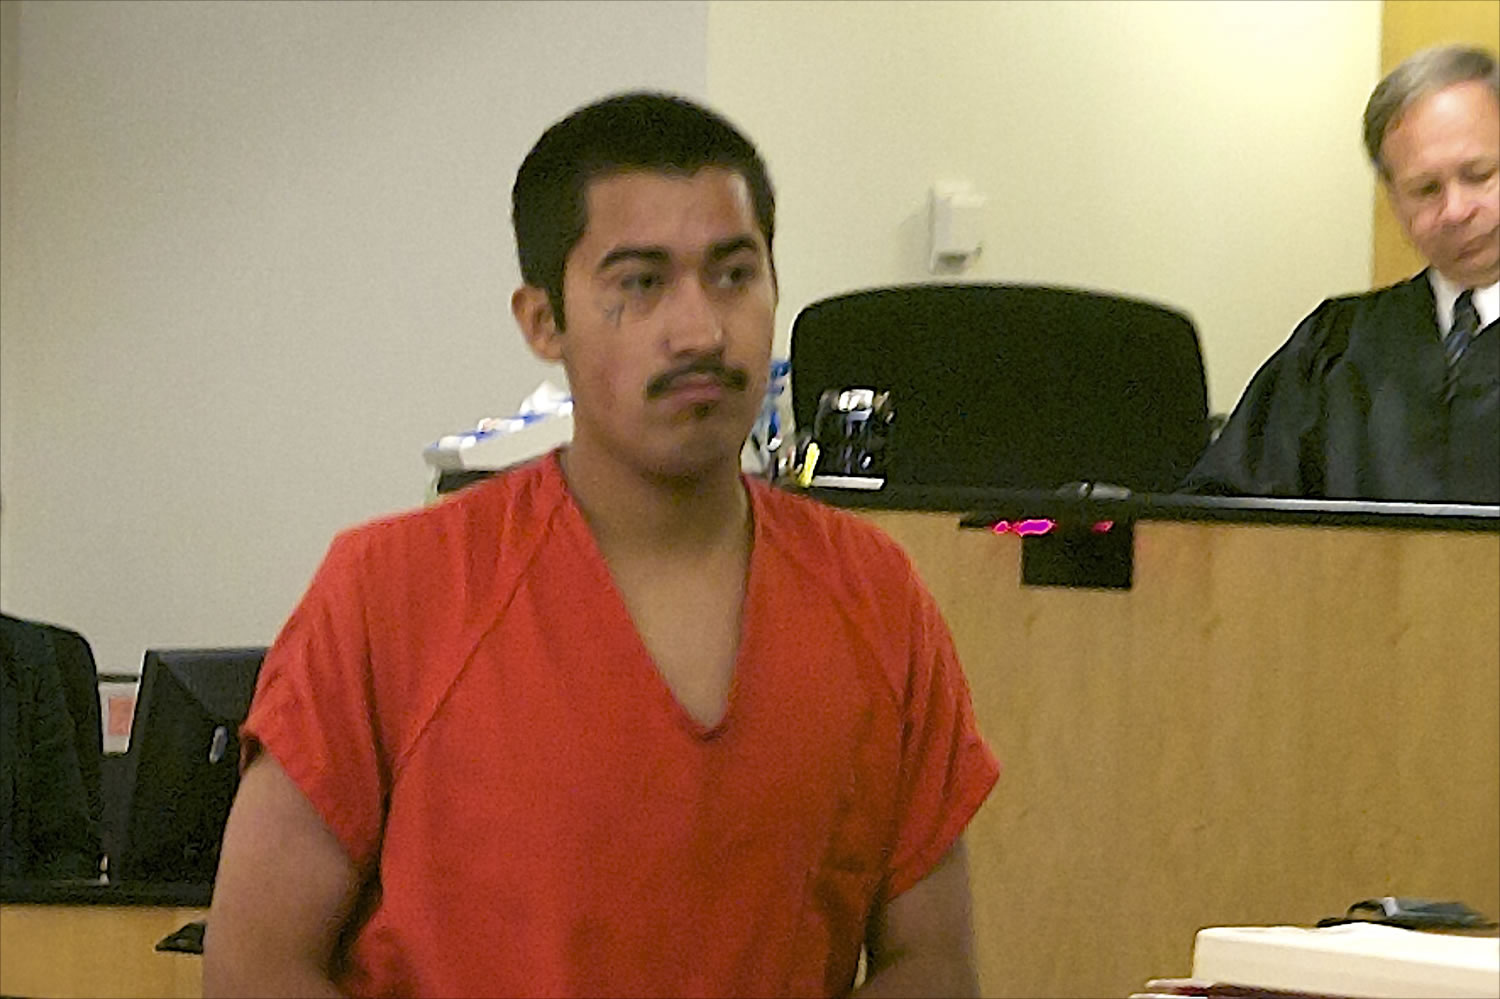 Suspected gang member Jeremy Pina has been sentenced to 108 months in prison after a 2012 shooting.